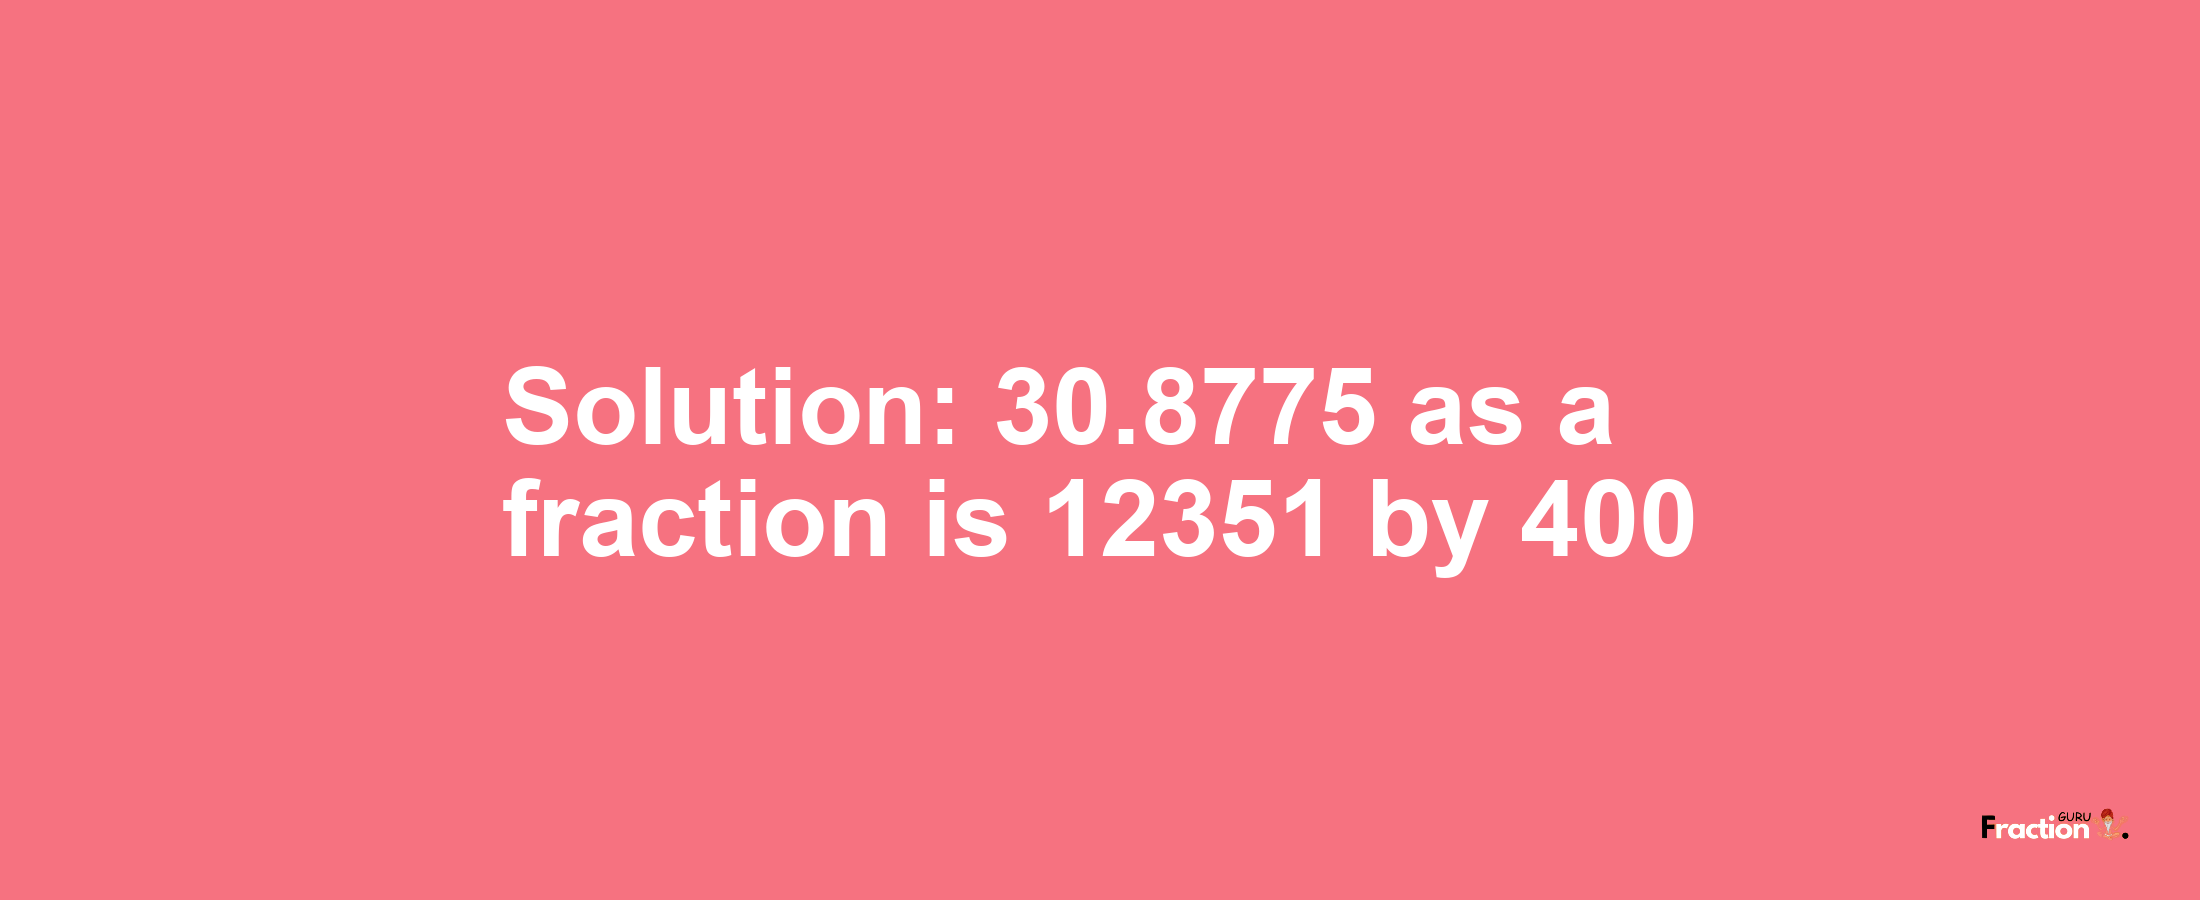 Solution:30.8775 as a fraction is 12351/400